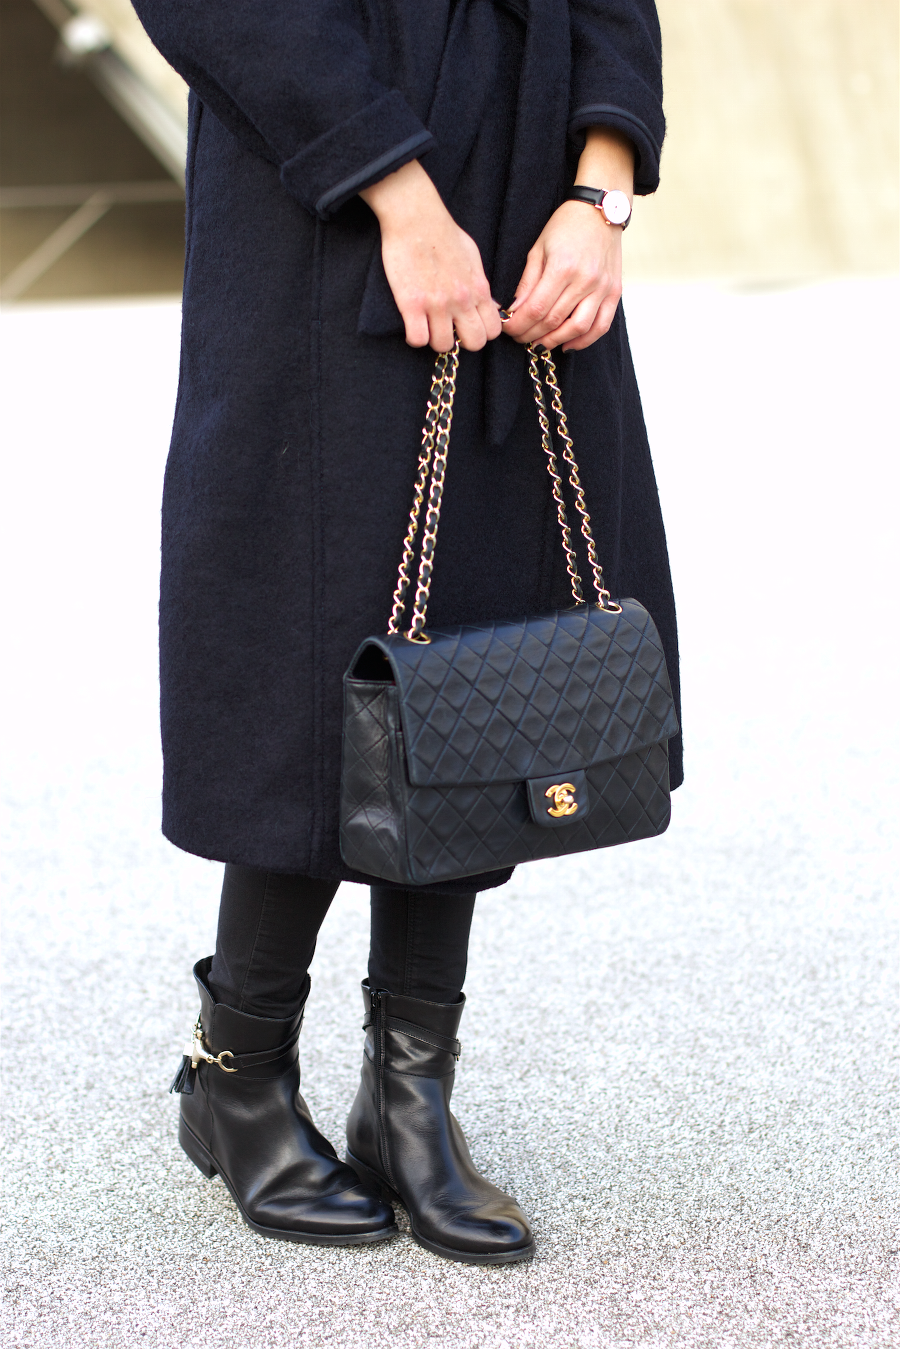 Navy Blue Coat Chanel Bag Fall Winter Outfit